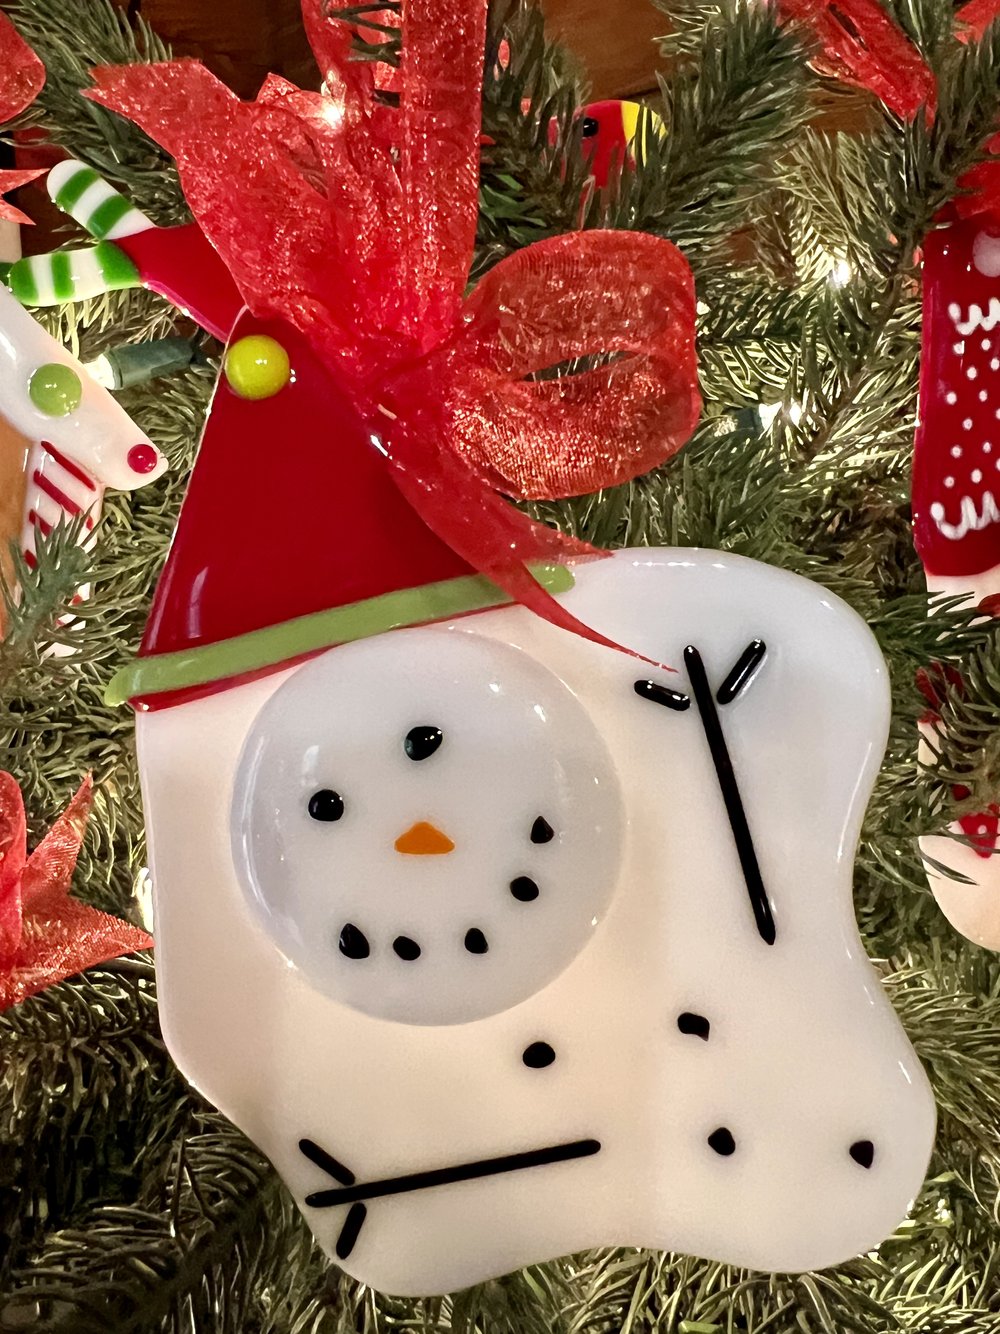 Melting Snowman Ornament with Red Hat — WITS END DESIGNS